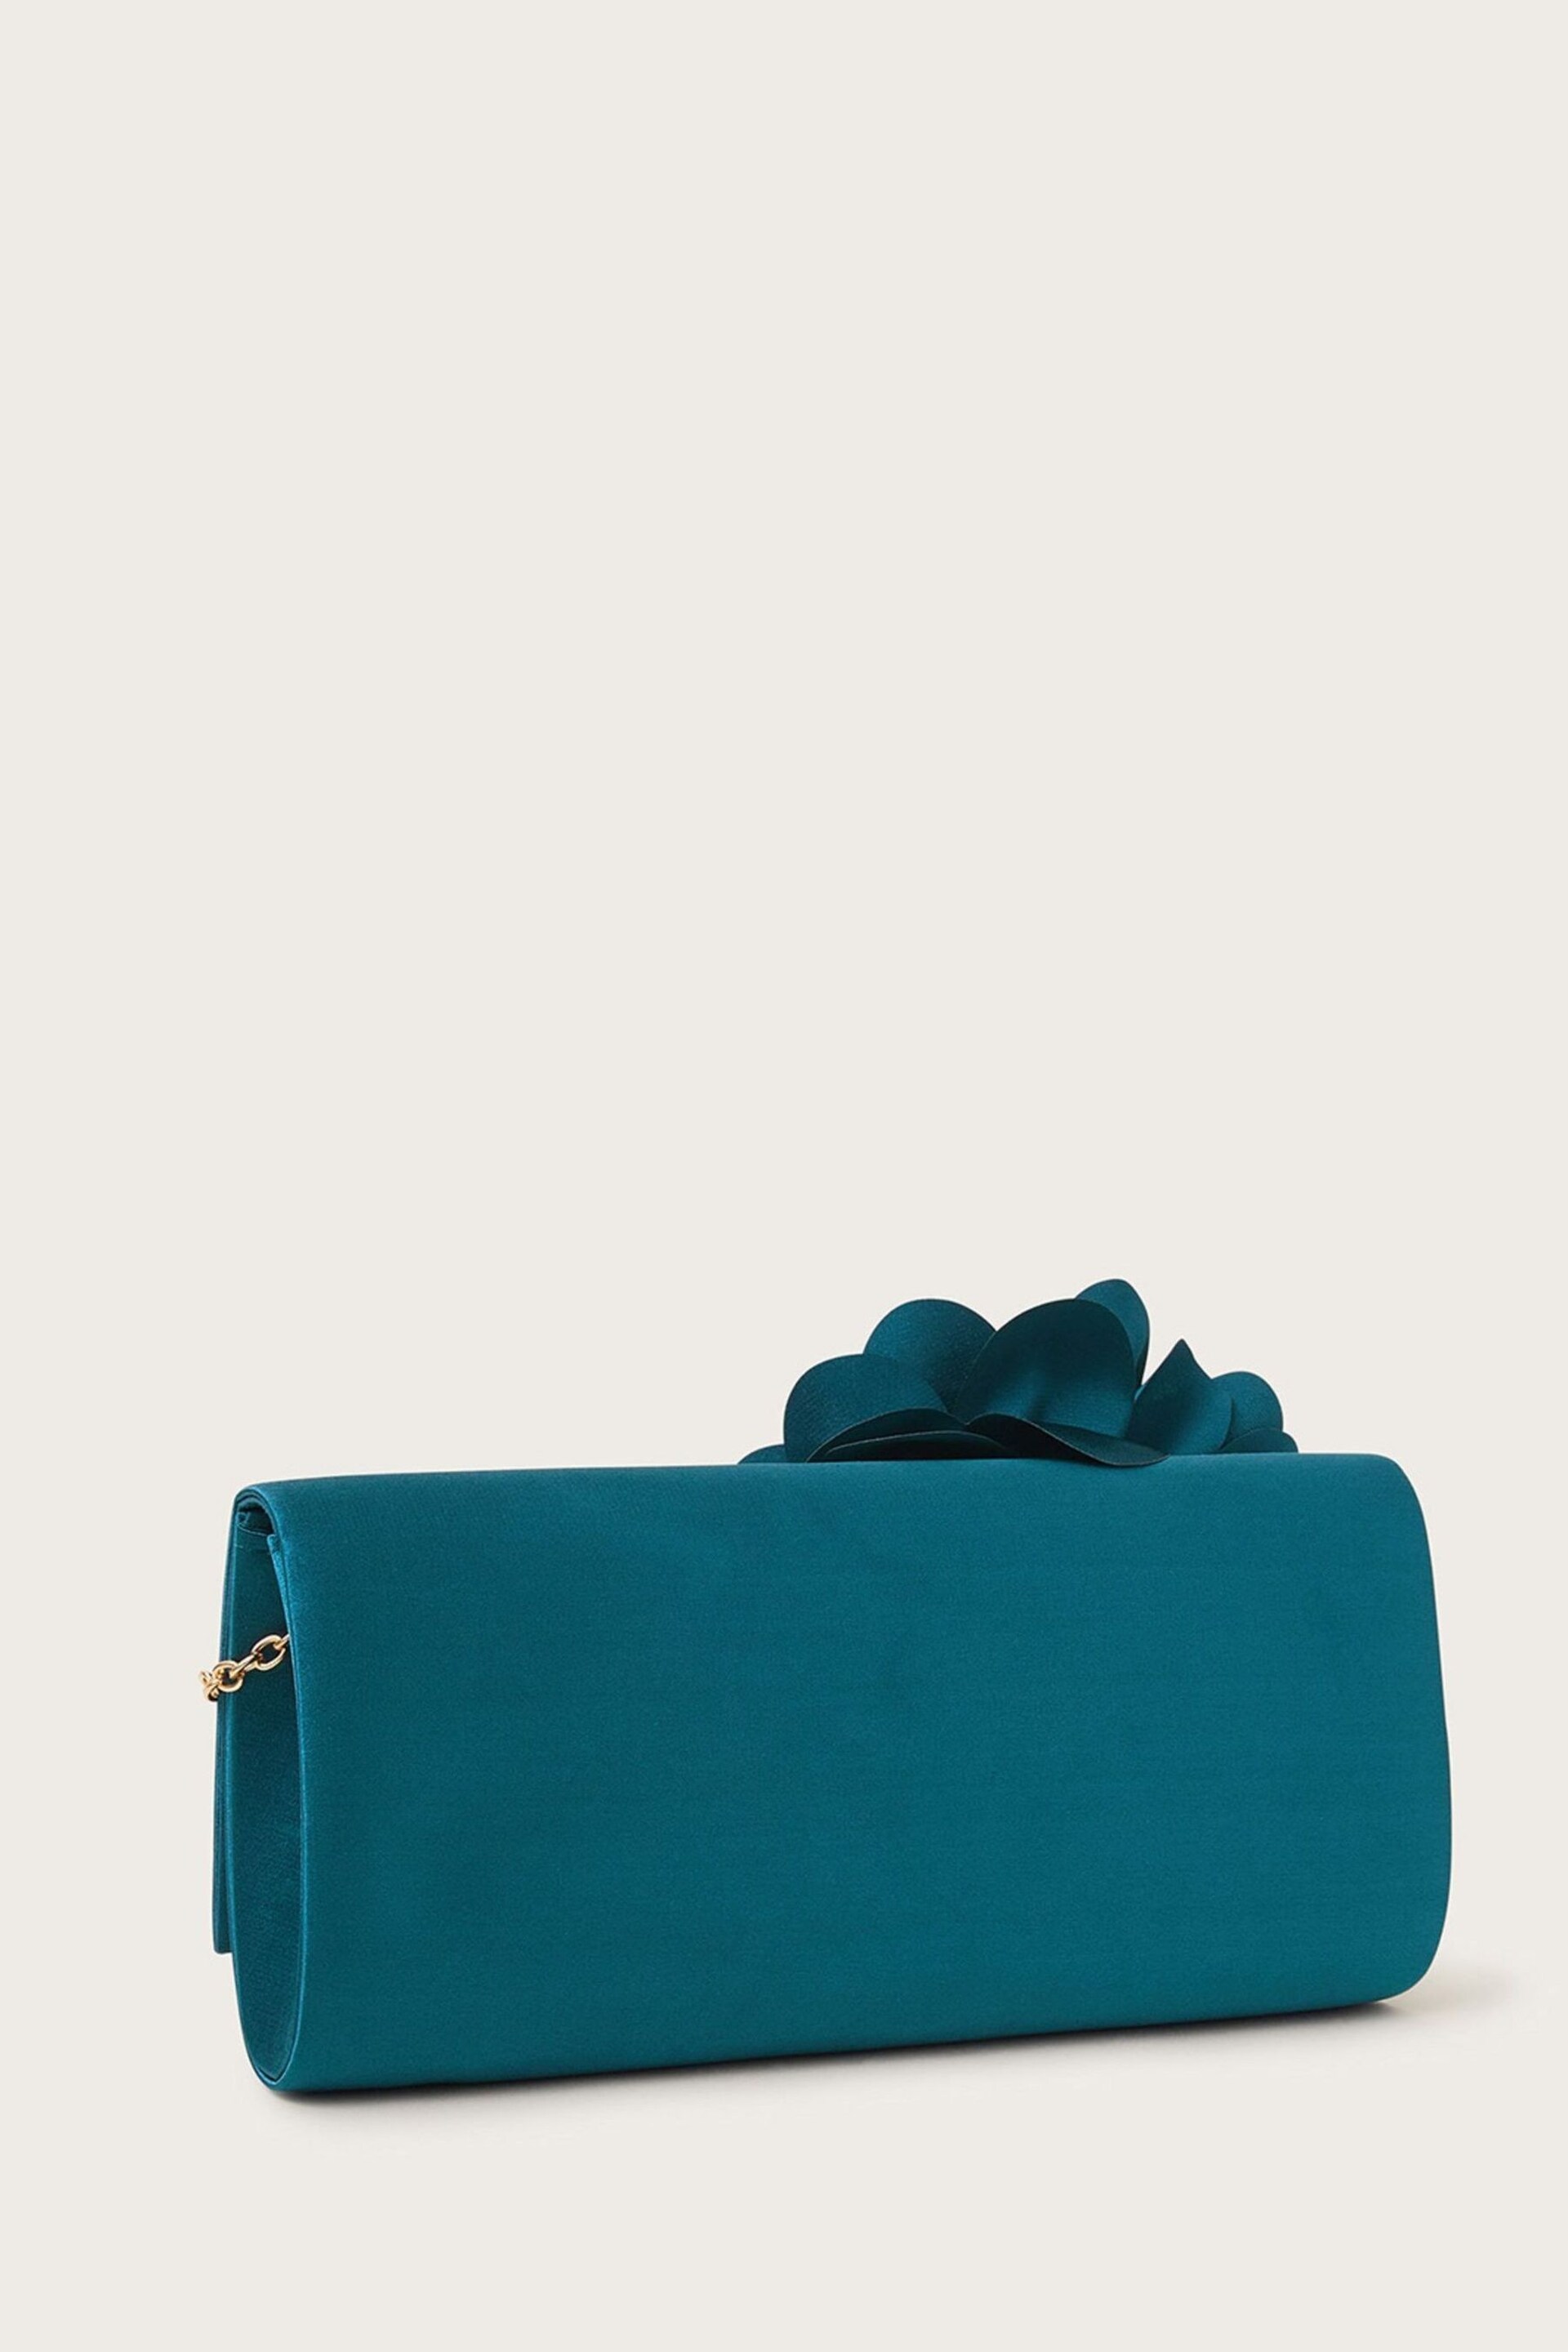 Monsoon Blue Corsage Occasion Bag - Image 2 of 3